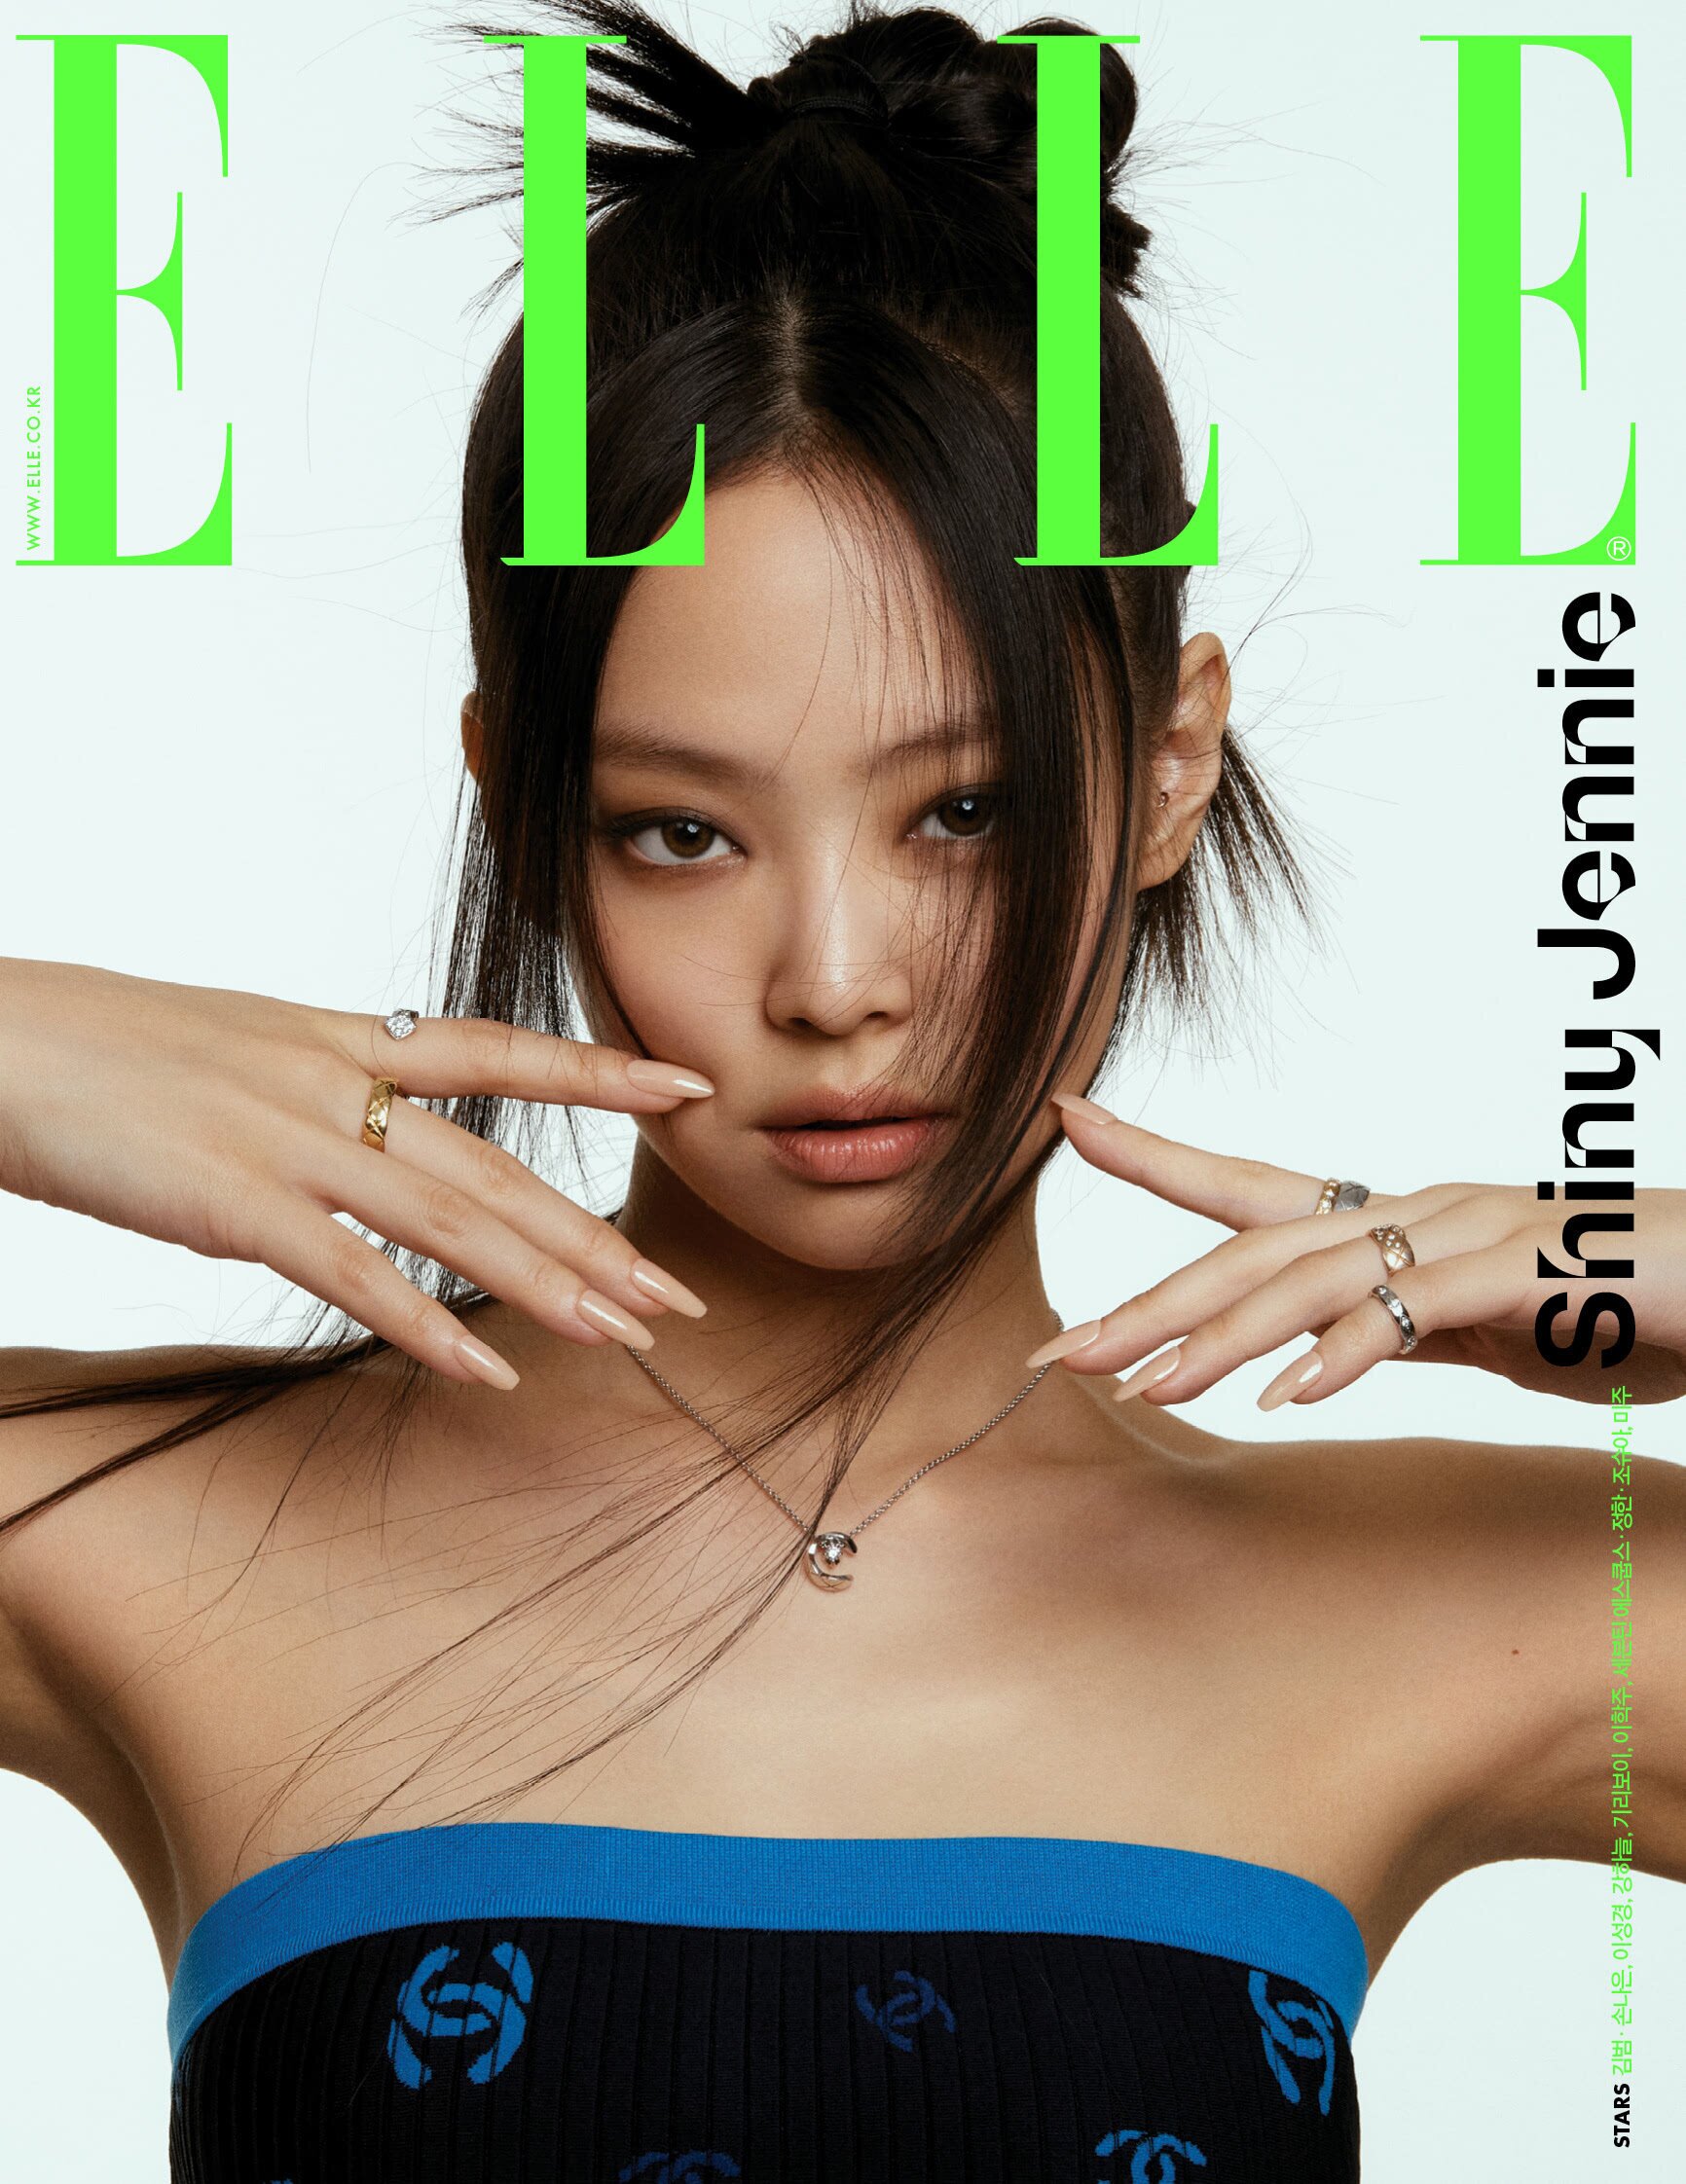 BLACKPINK Jennie for ELLE Magazine February 2022 Issue x Chanel 